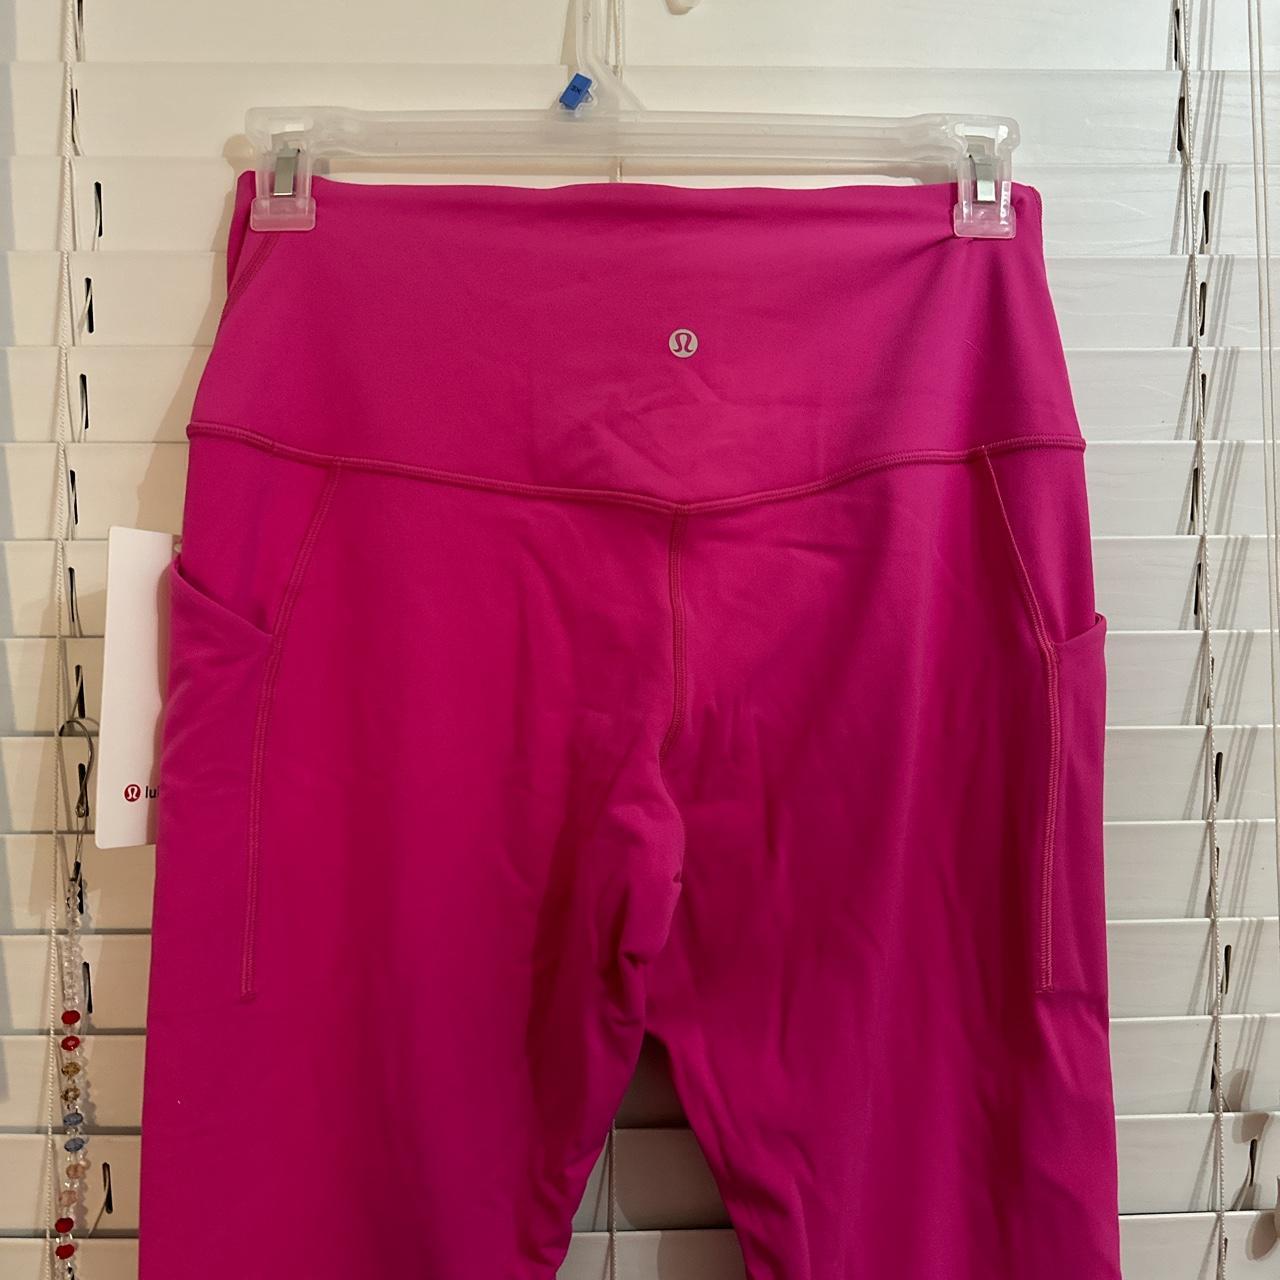 Sonic Pink Lululemon Align Pants 25” Size 12 with